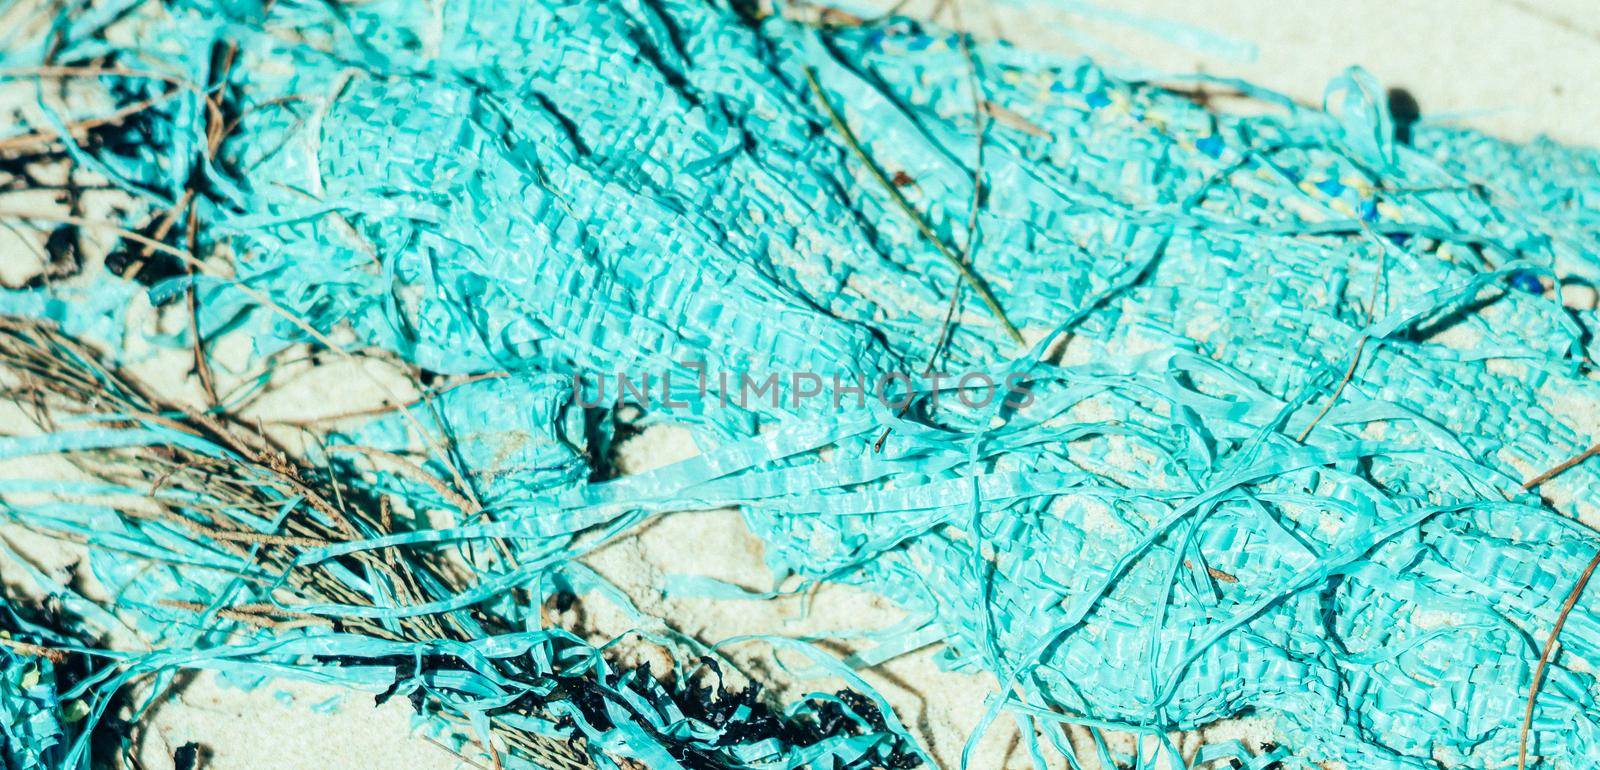 BANNER abstract beauty background. Copy space soft bag cloth rag fabric flap texture surface material on sand ground. Turquoise light blue colour. Design lines maze life photography. More in stock.